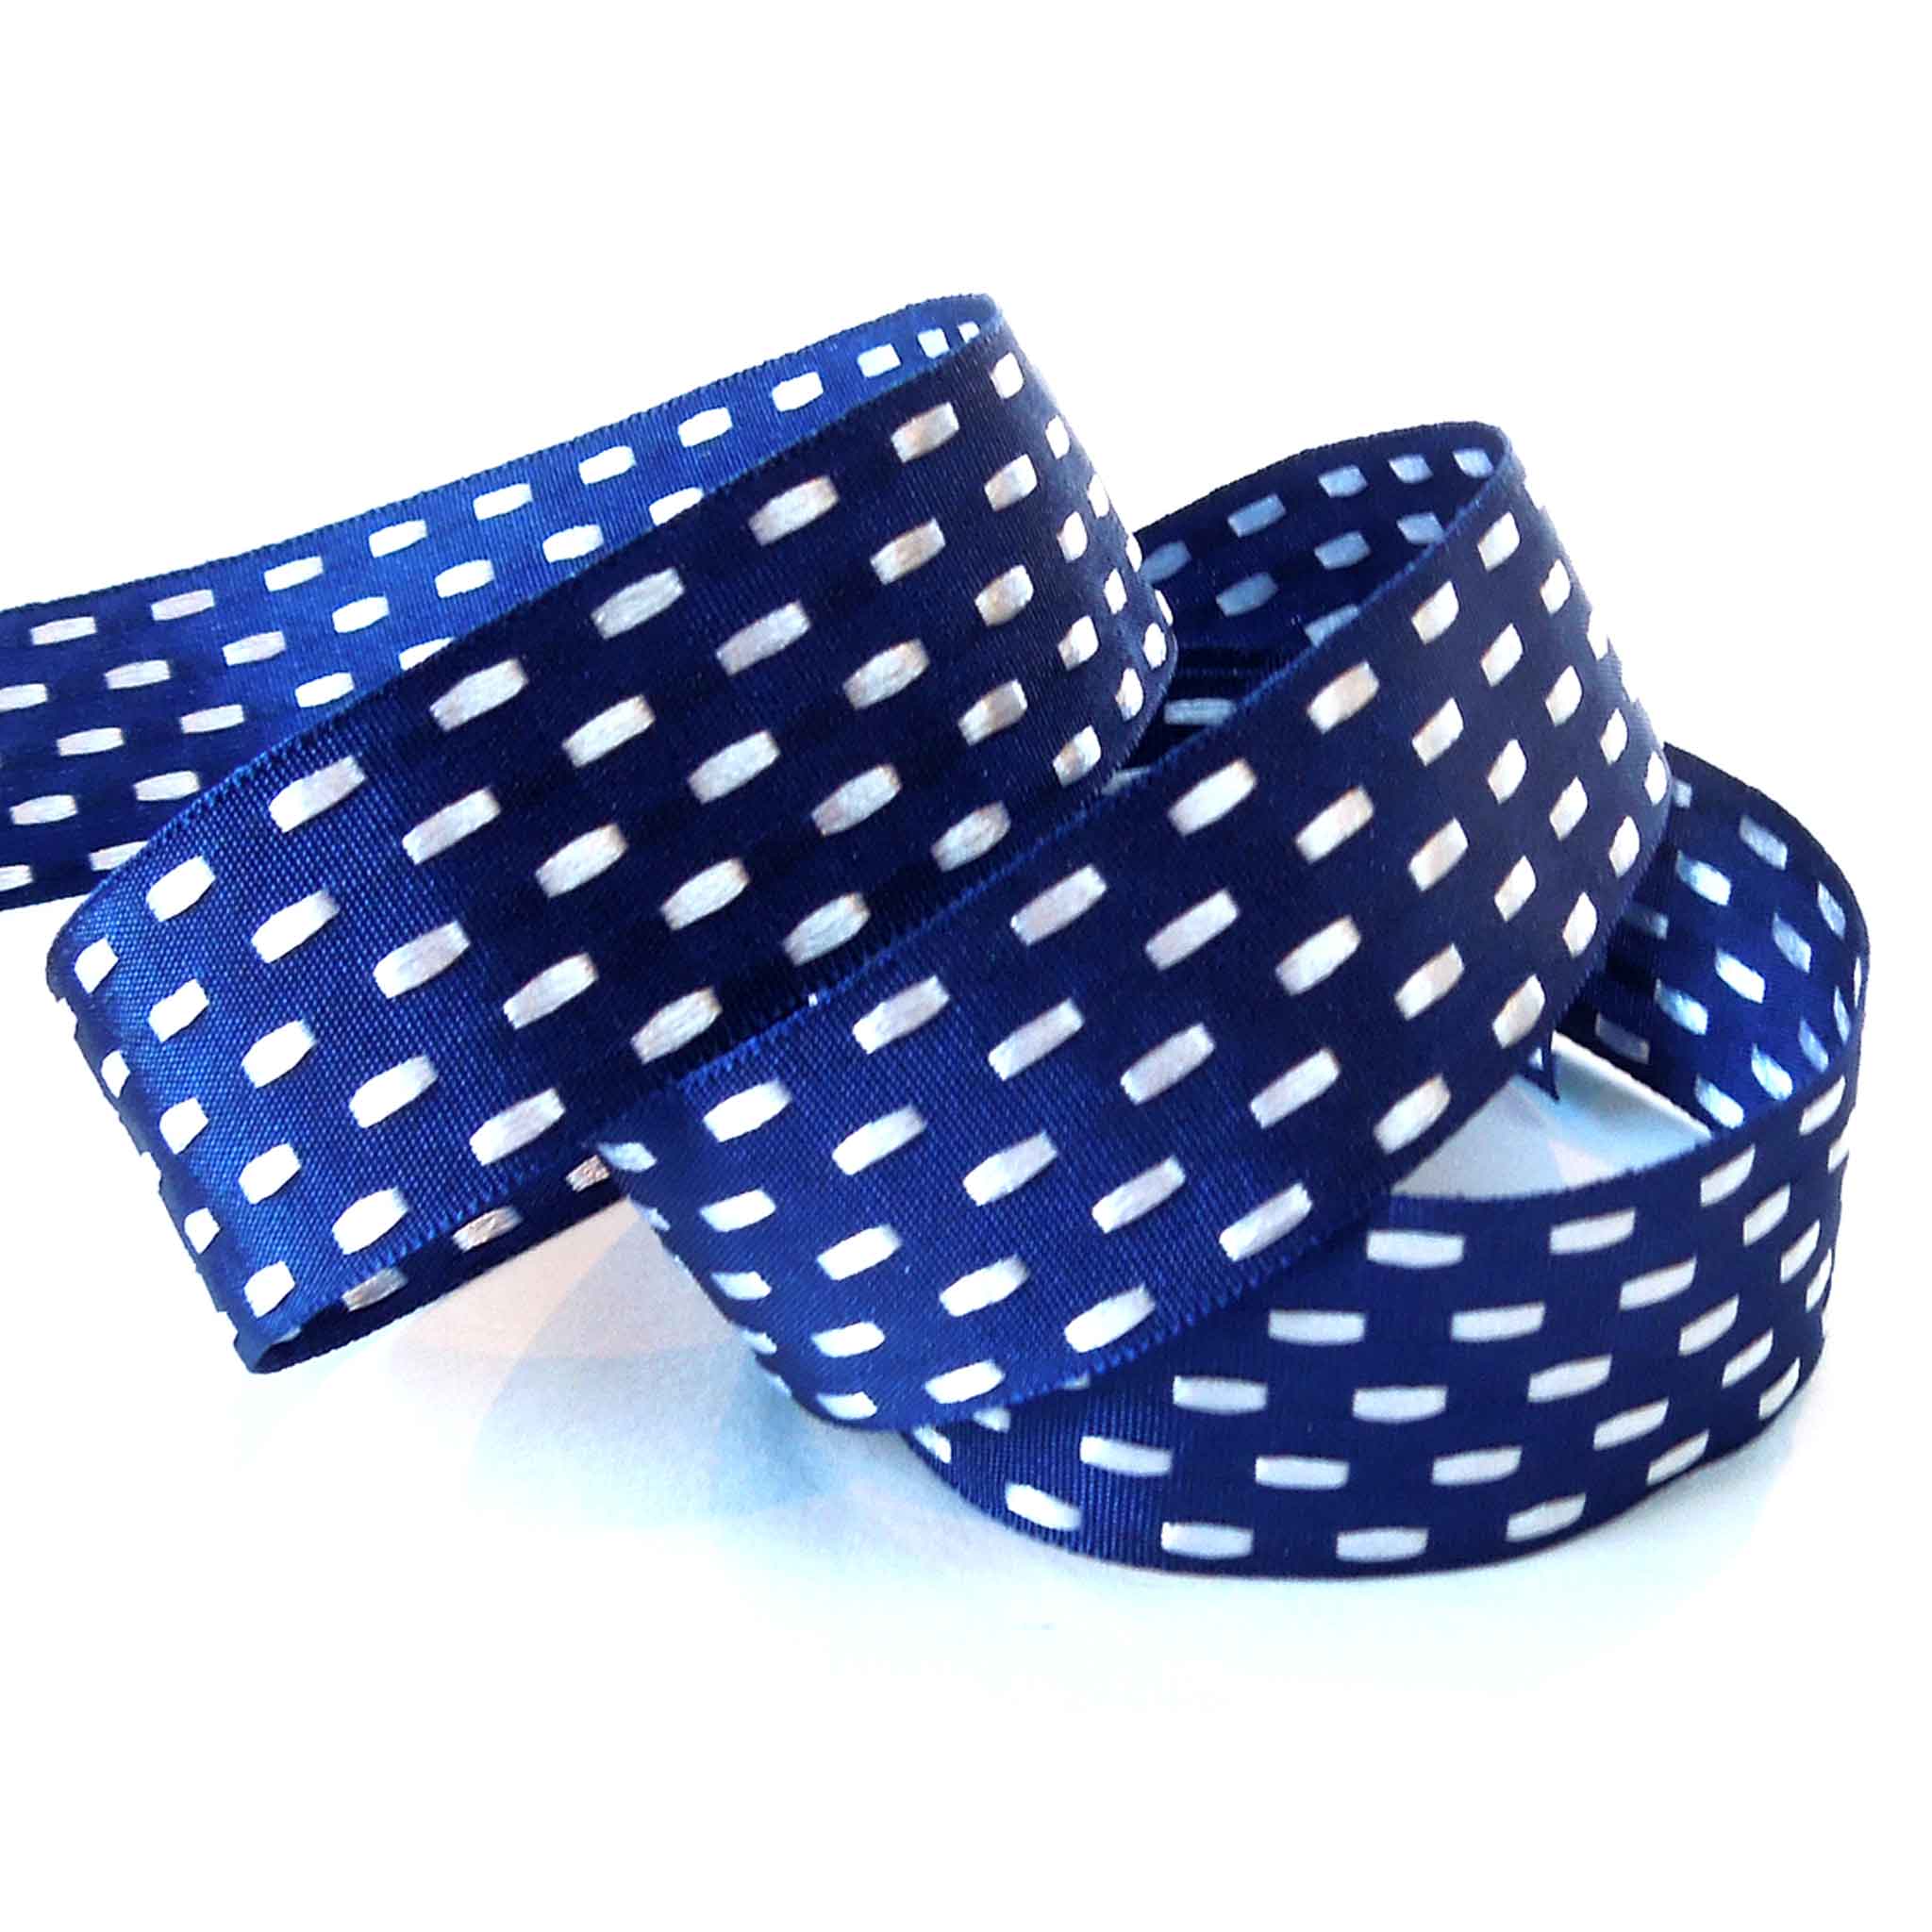 25mm Parallel Stitch Ribbon - Navy Blue and Bianco - Berisfords